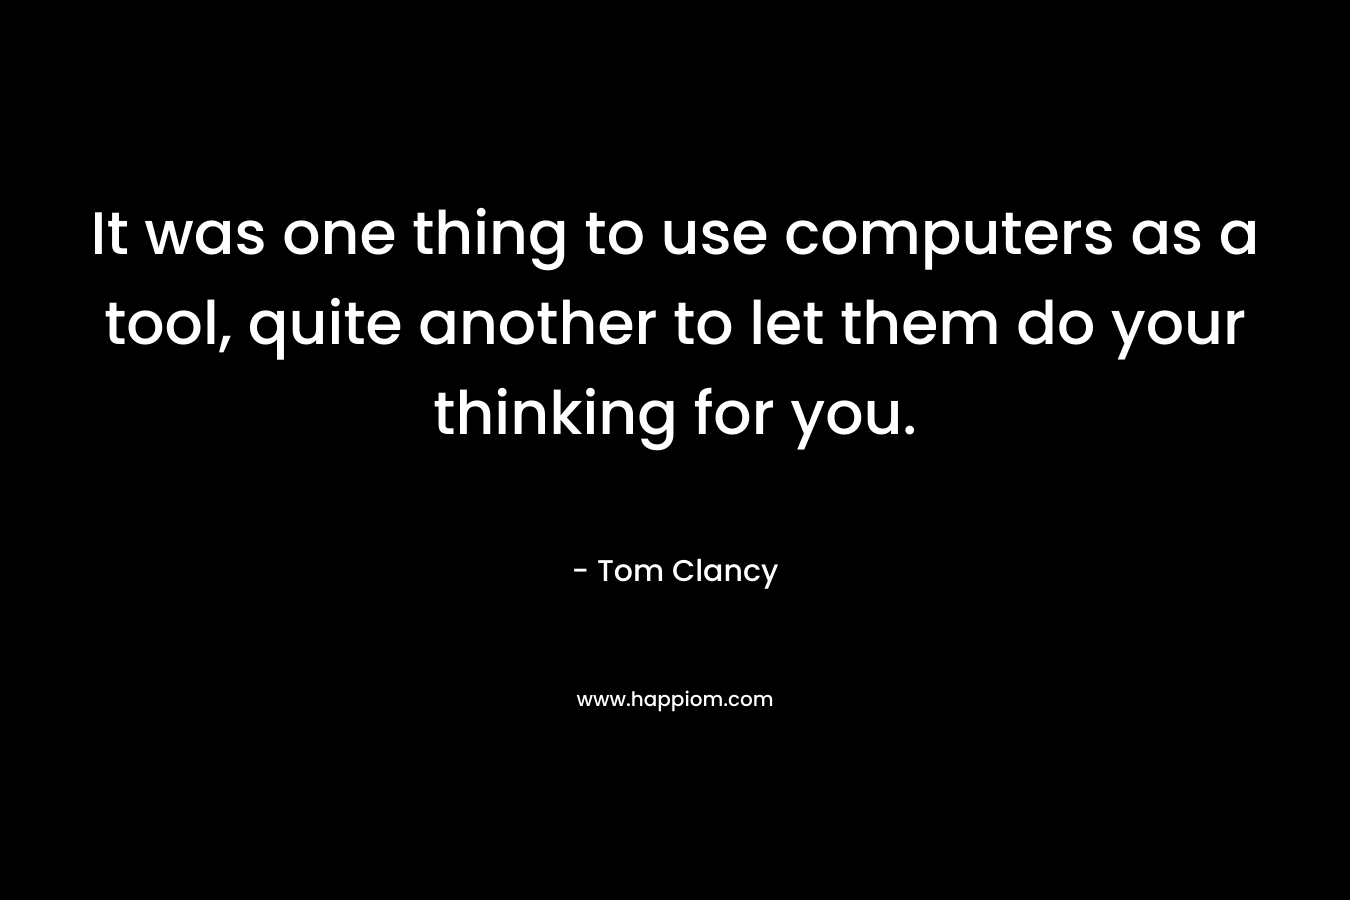 It was one thing to use computers as a tool, quite another to let them do your thinking for you. – Tom Clancy